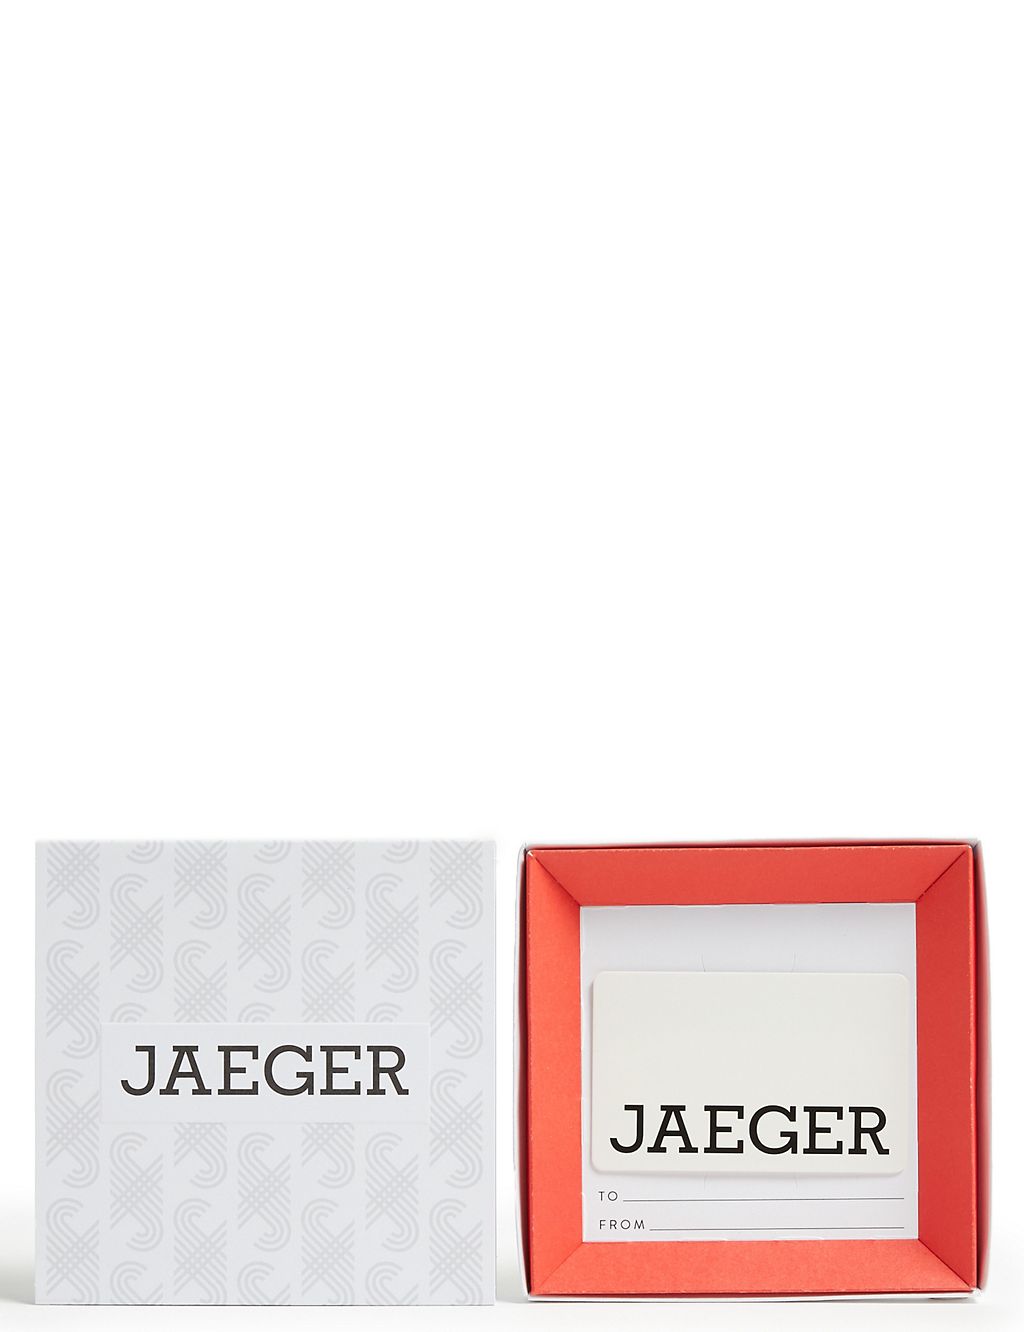 Jaeger Gift Card in Presentation Box 1 of 5